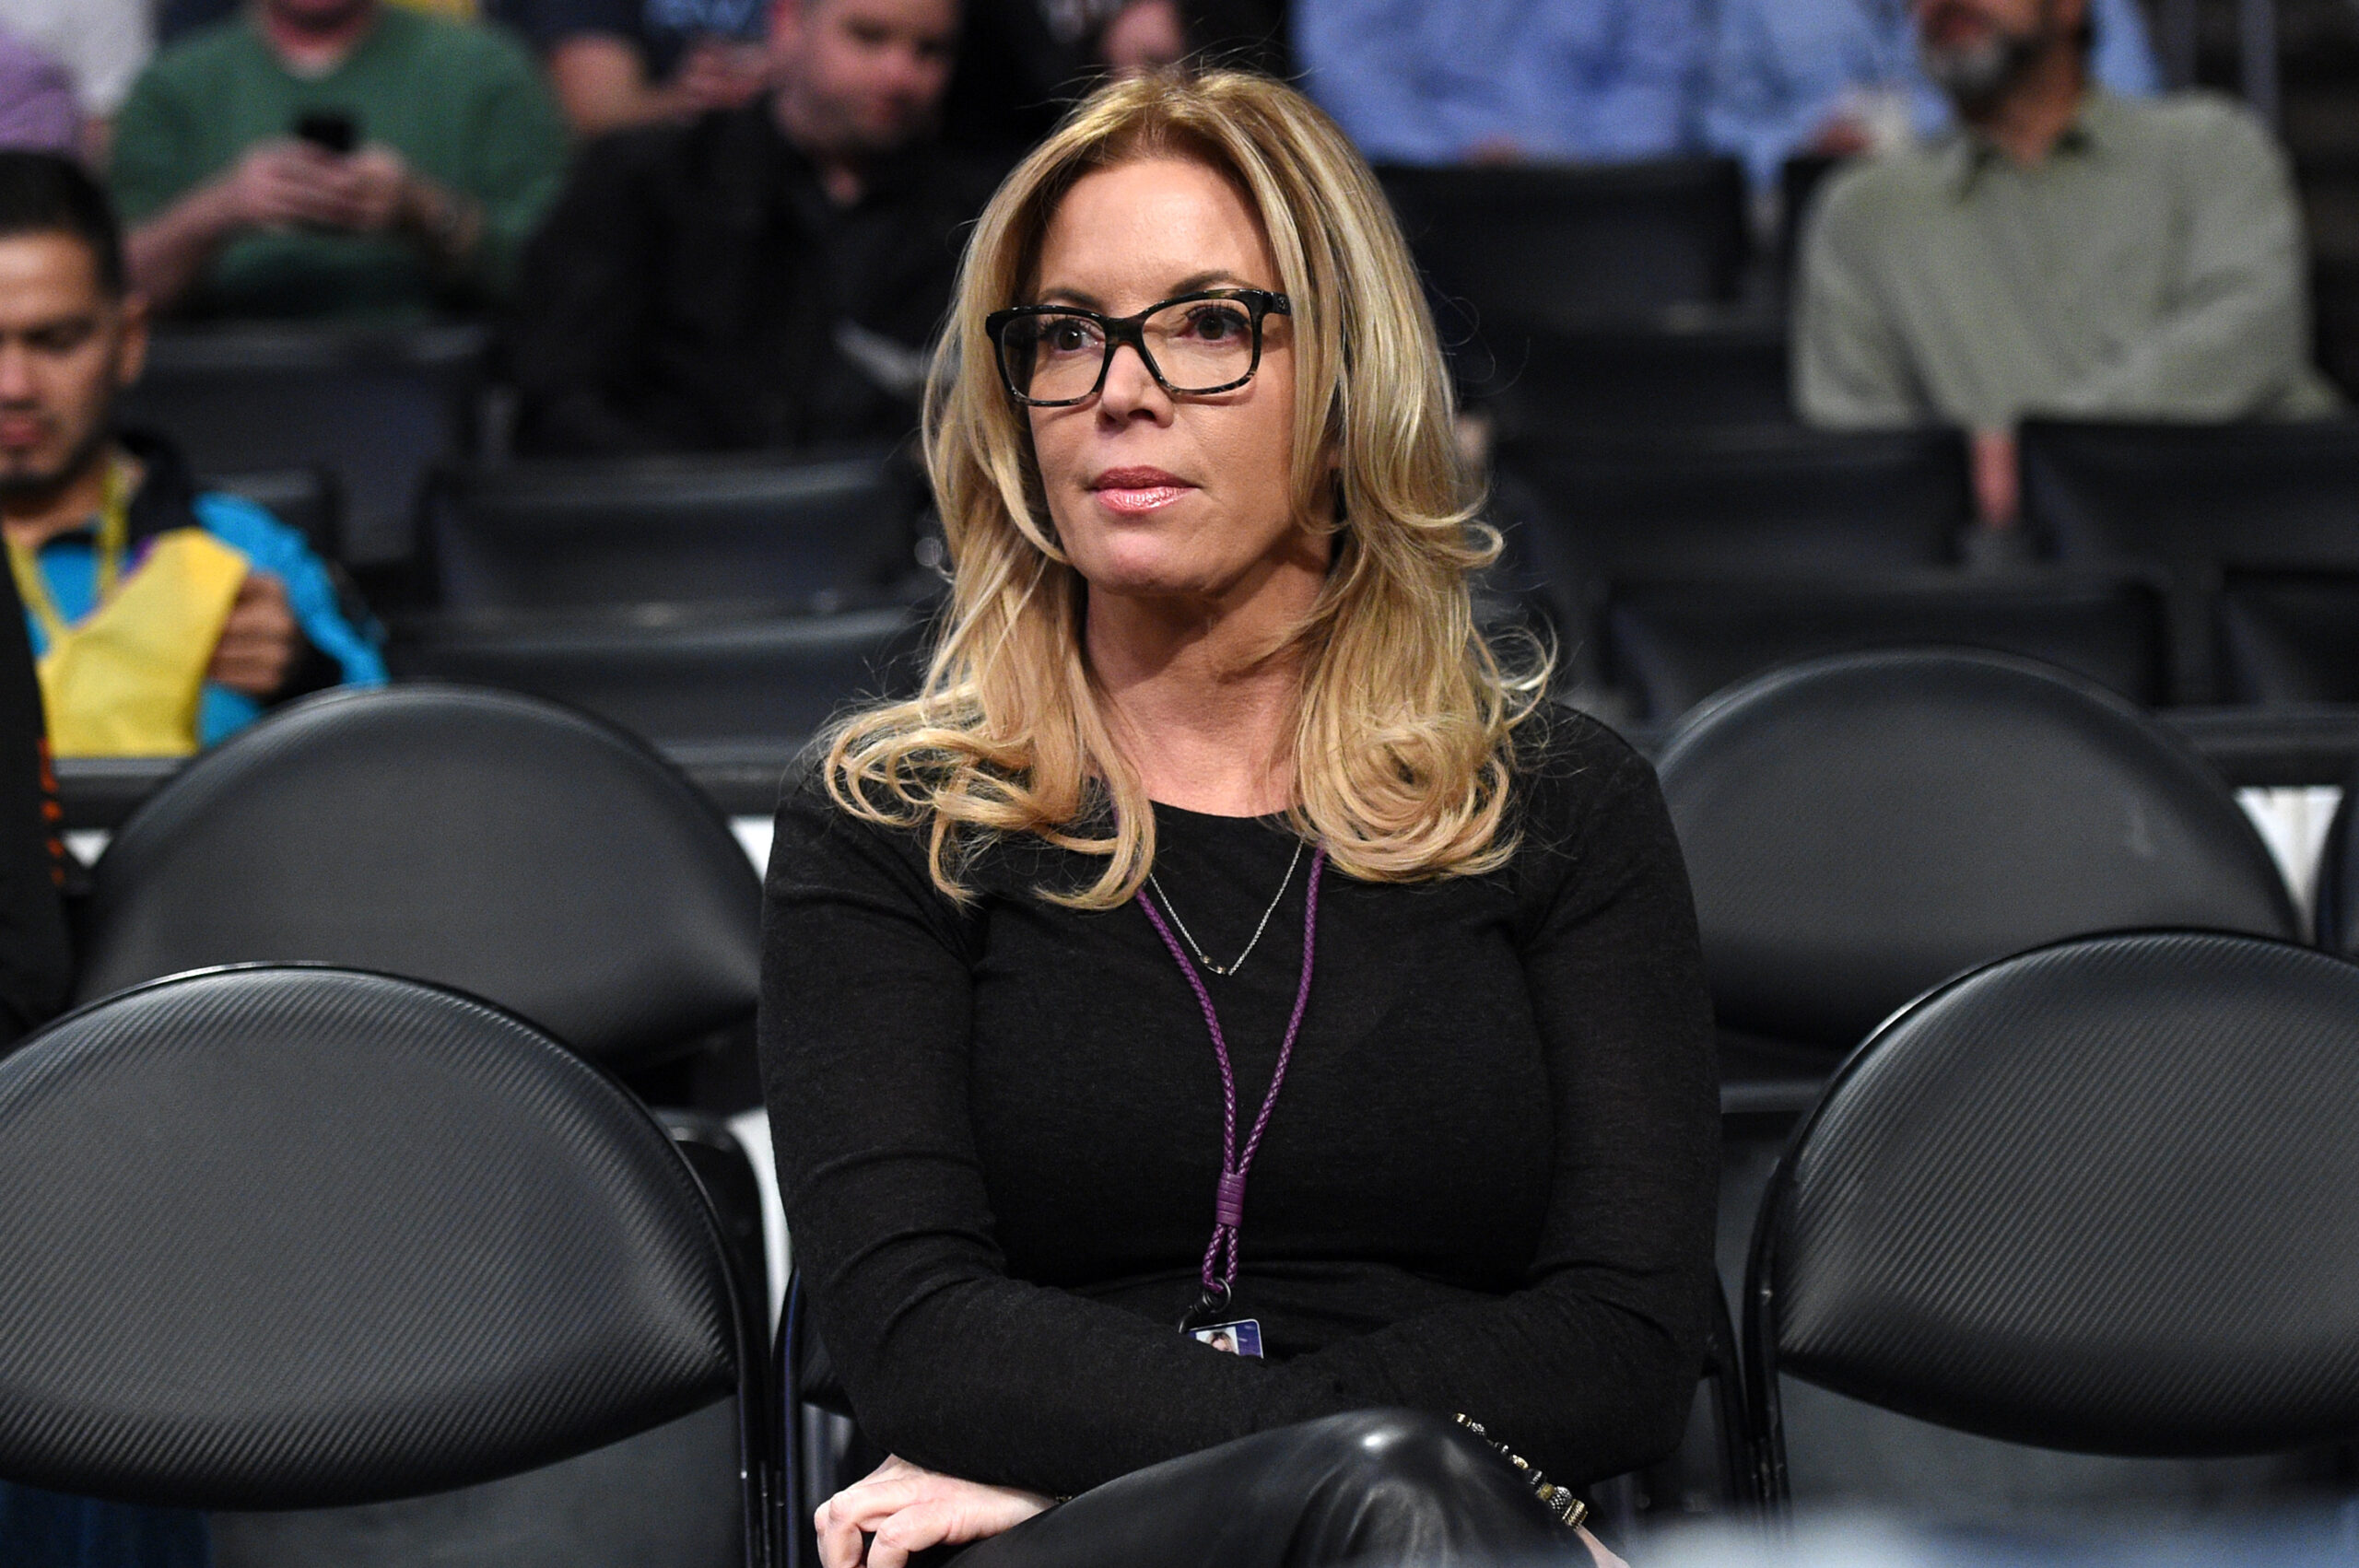 Jeanie Buss owner of the Los Angeles Lakers